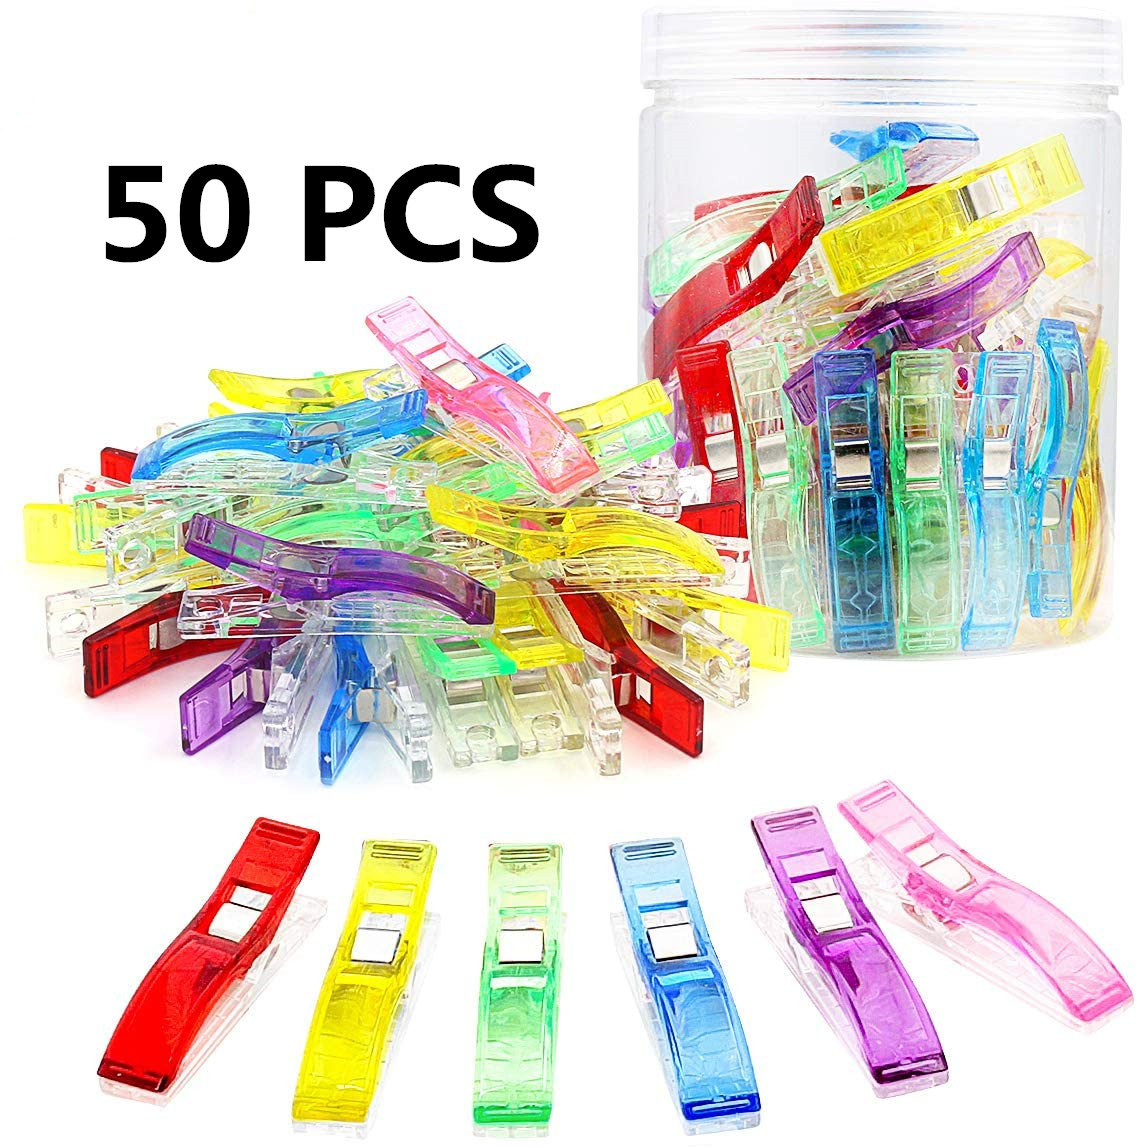  200 Pcs Sewing Clips for Fabric Multipurpose Small Mini Sewing  Clips Quilting Clips for Fabric, Sew Binding, Crafts, Fabric Clips for  Sewing and Quilting : Arts, Crafts & Sewing